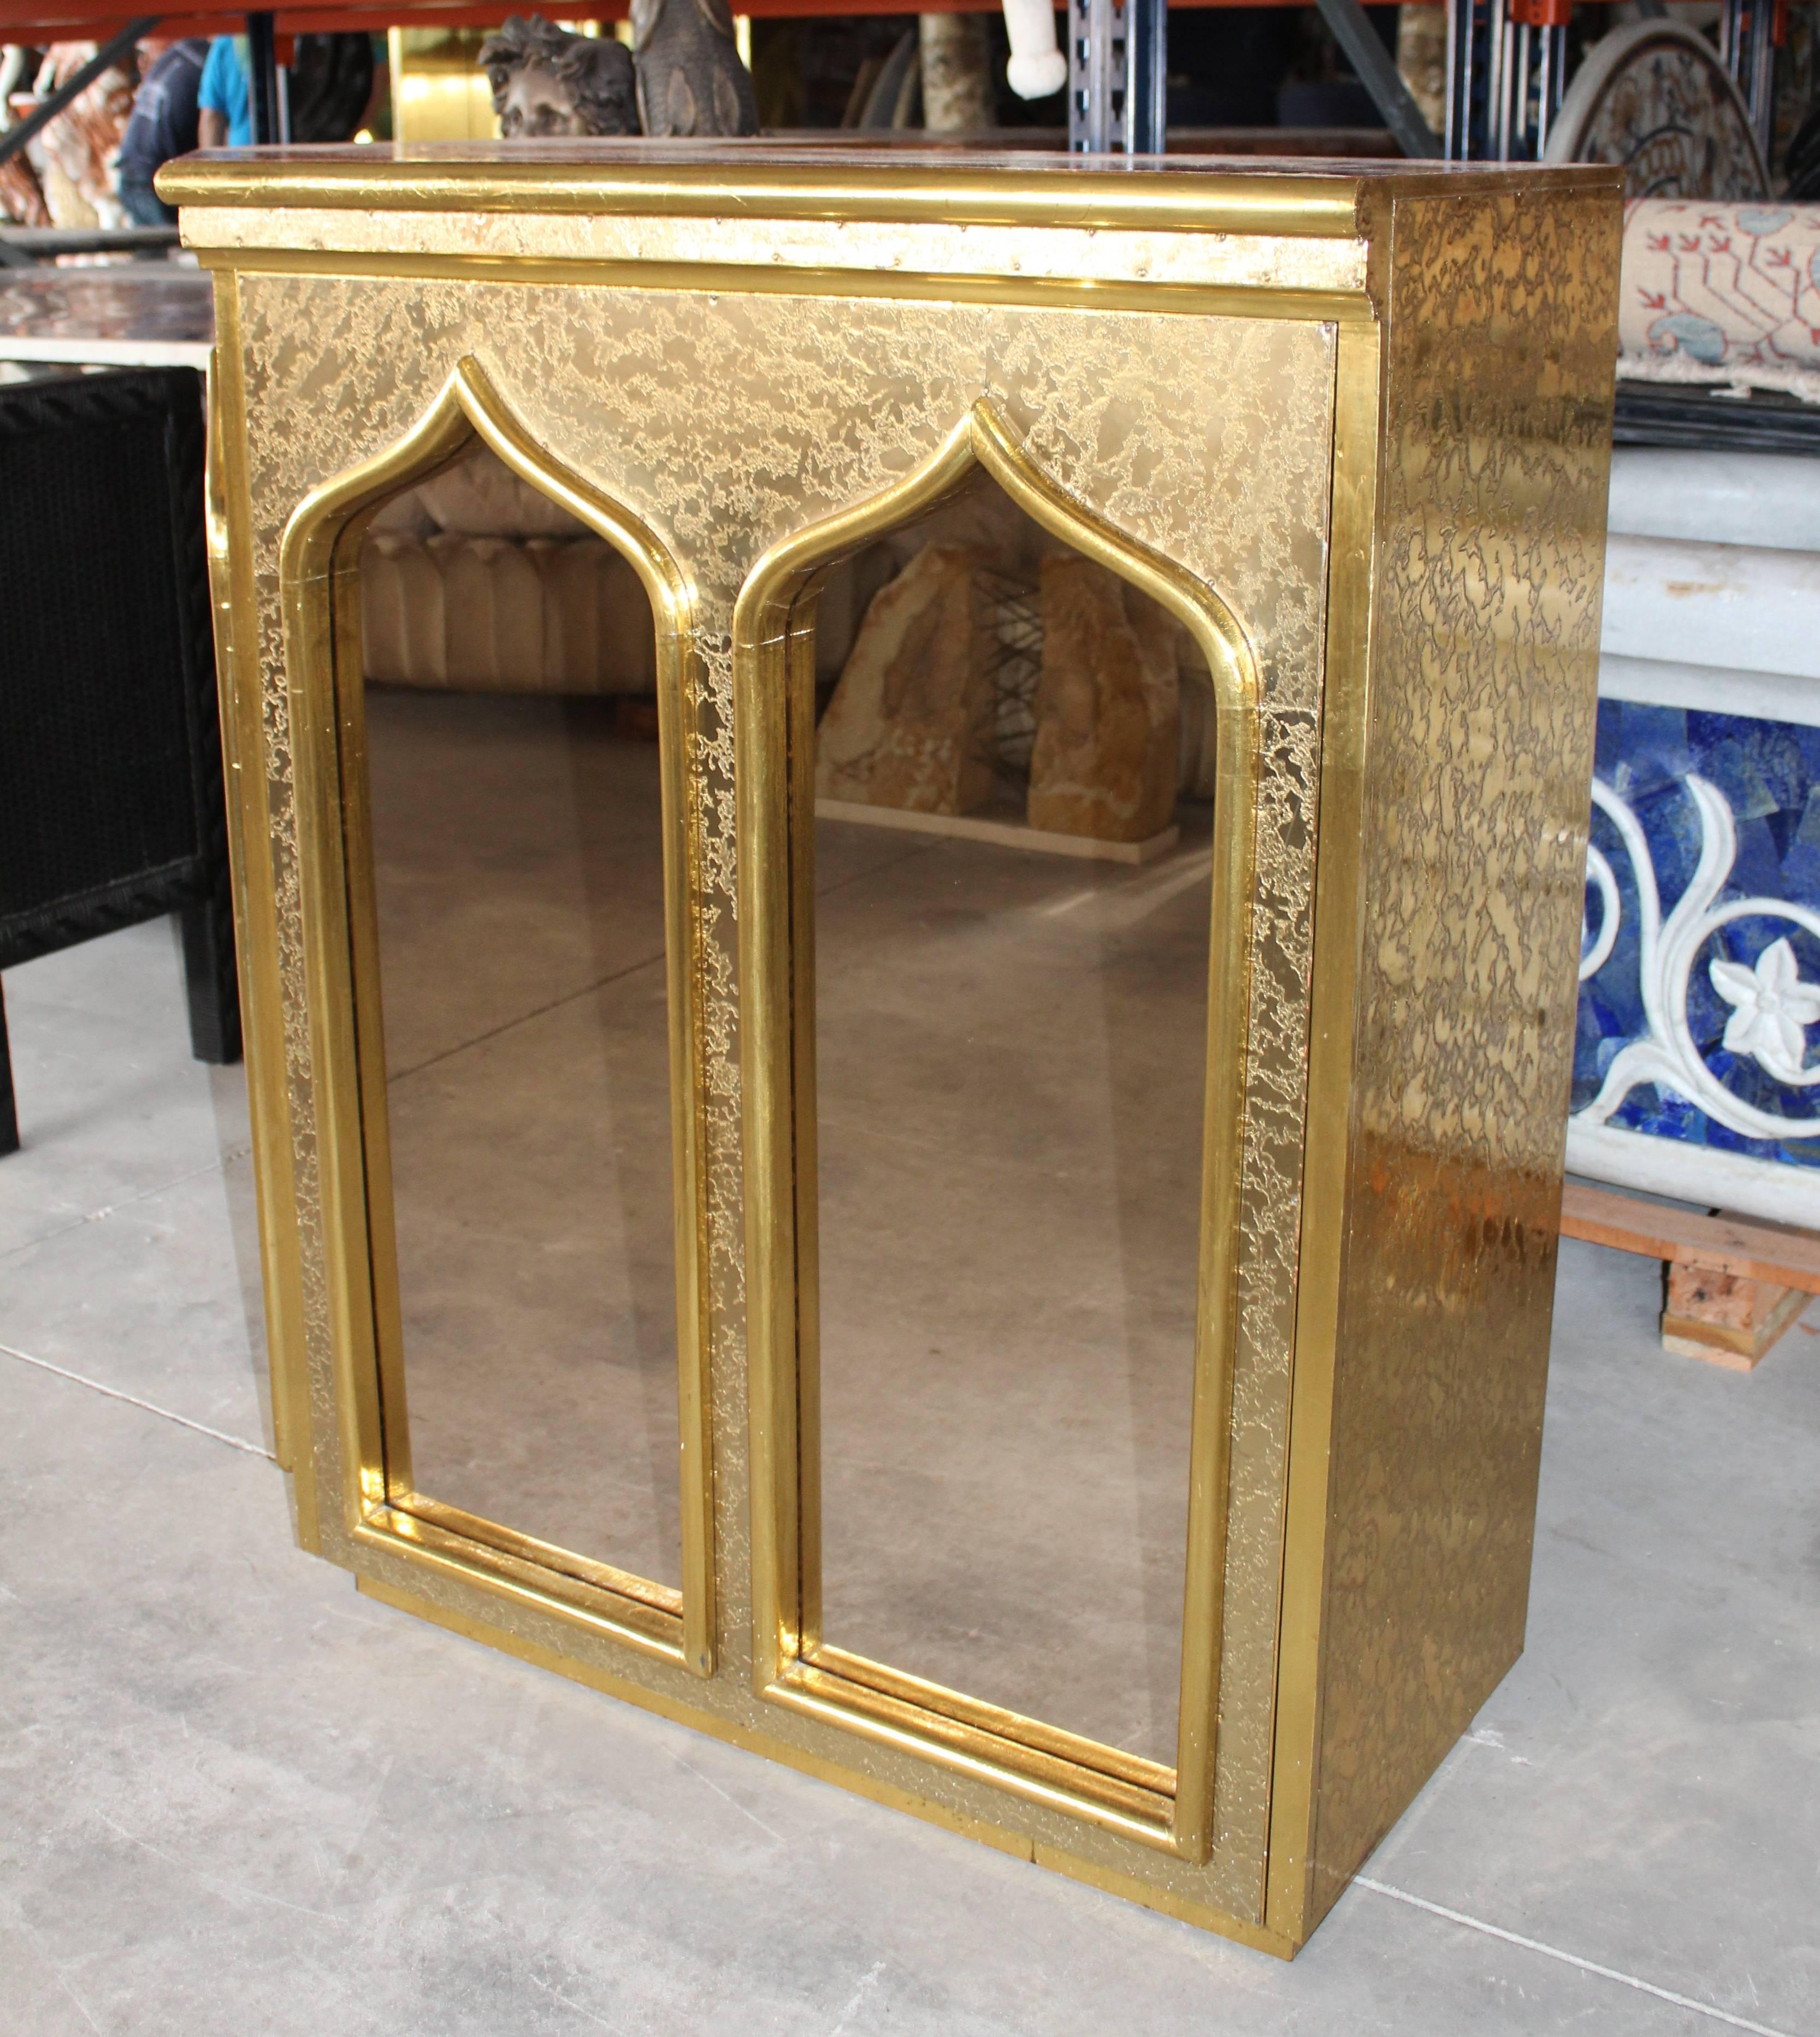 1980 bar table handcrafted with gilded brass and mirrors over a wooden frame signed by renowned artisan Gony Nava, inspired by Arabic influences as in the style of Rodolfo Dubarry, a popular Argentinian furniture designer who set up his workshop in